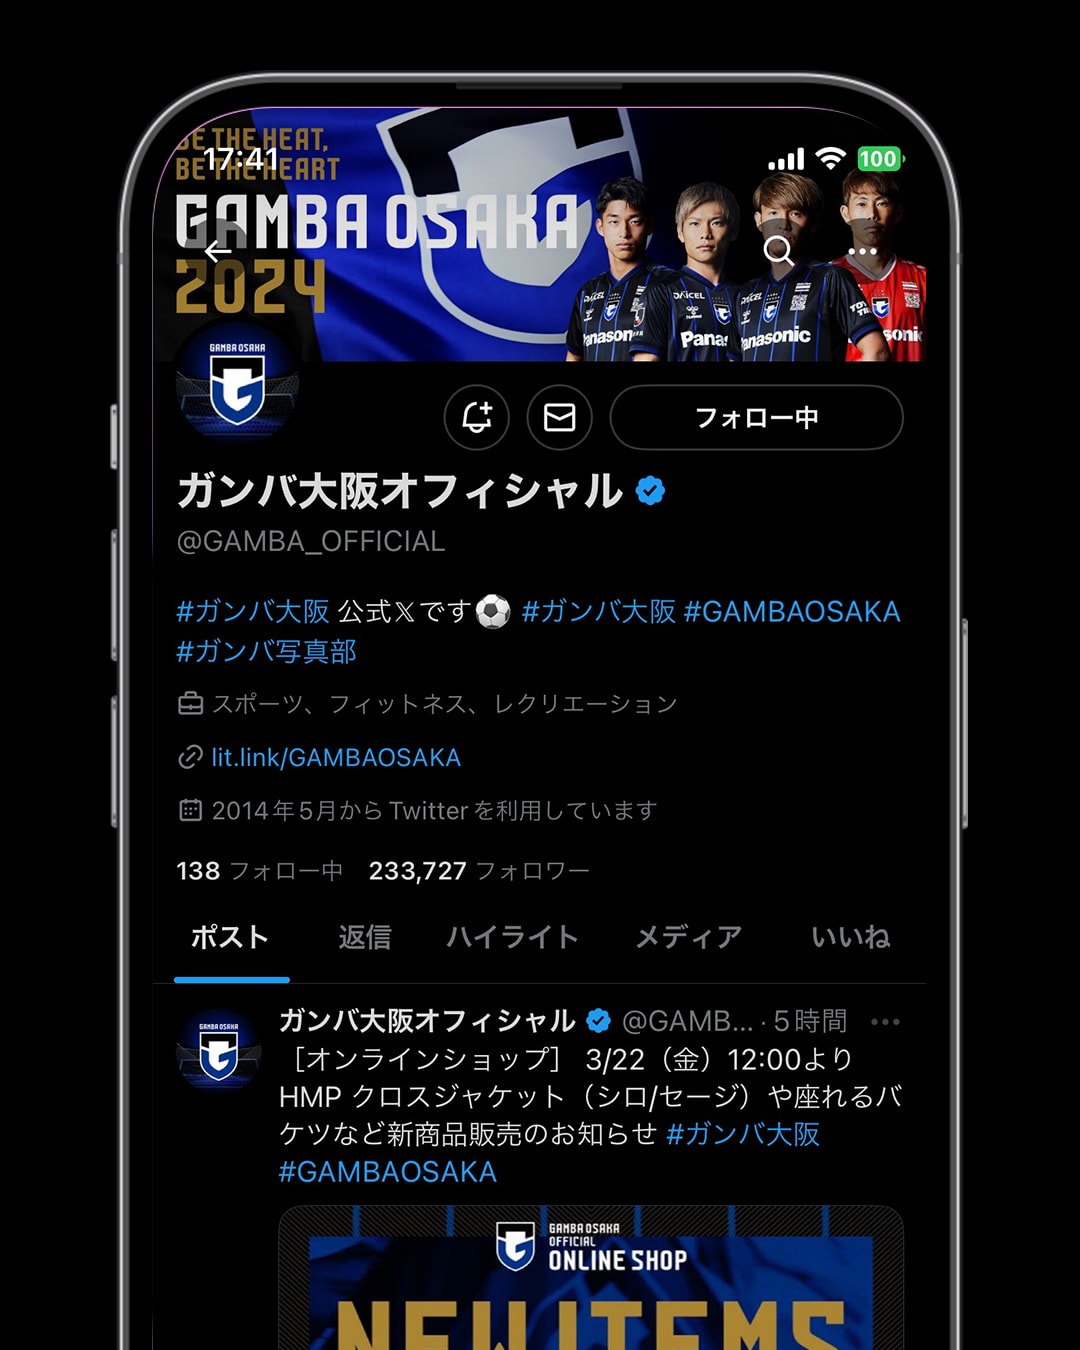 twitter@GAMBA_OFFICIAL